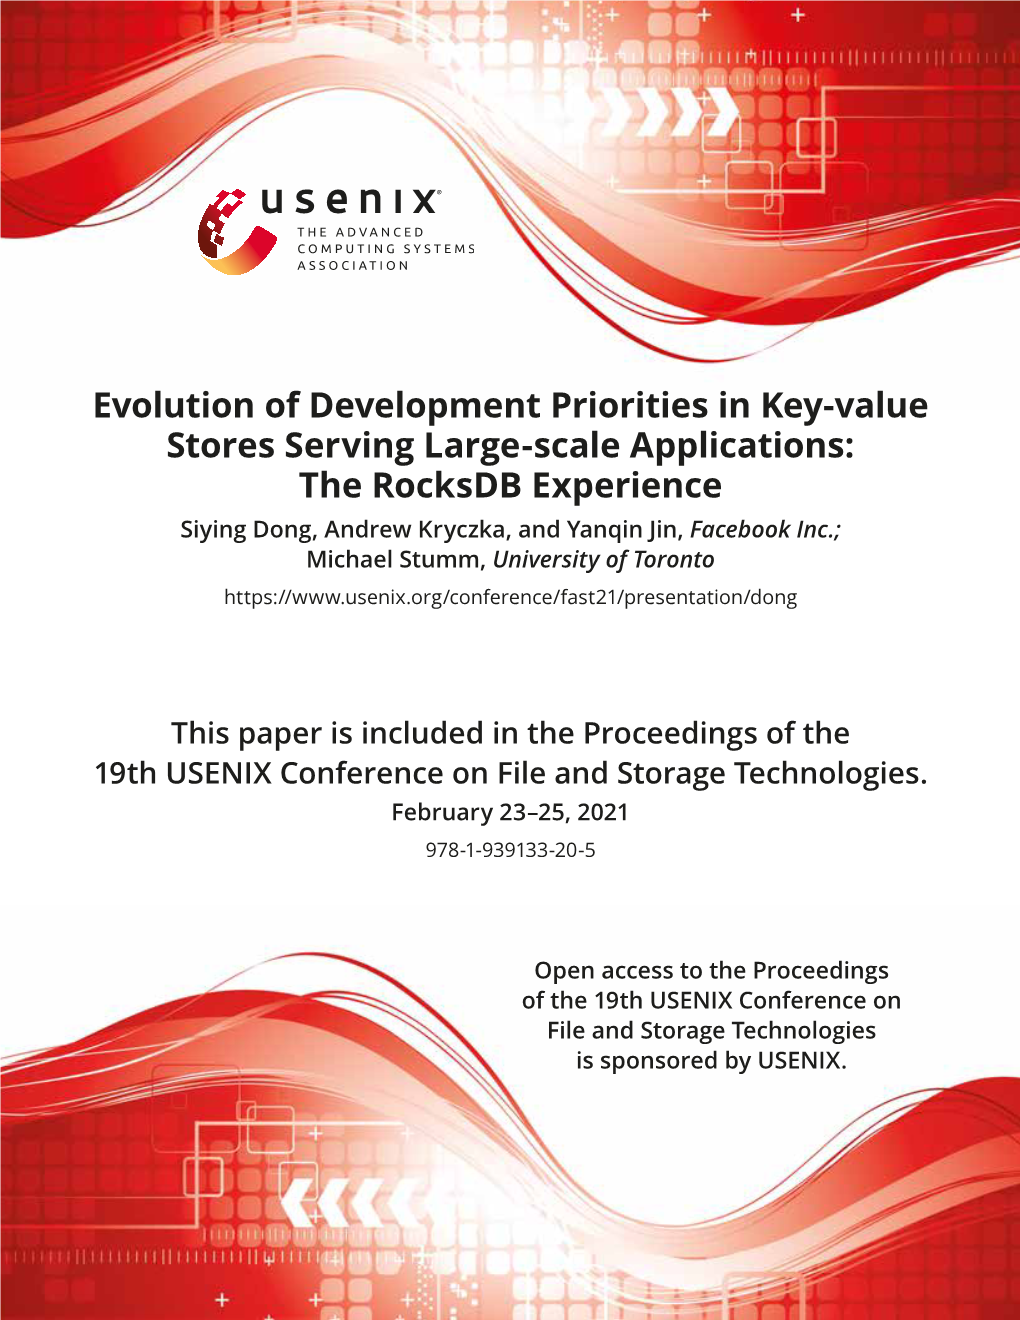 Evolution of Development Priorities in Key-Value Stores Serving Large